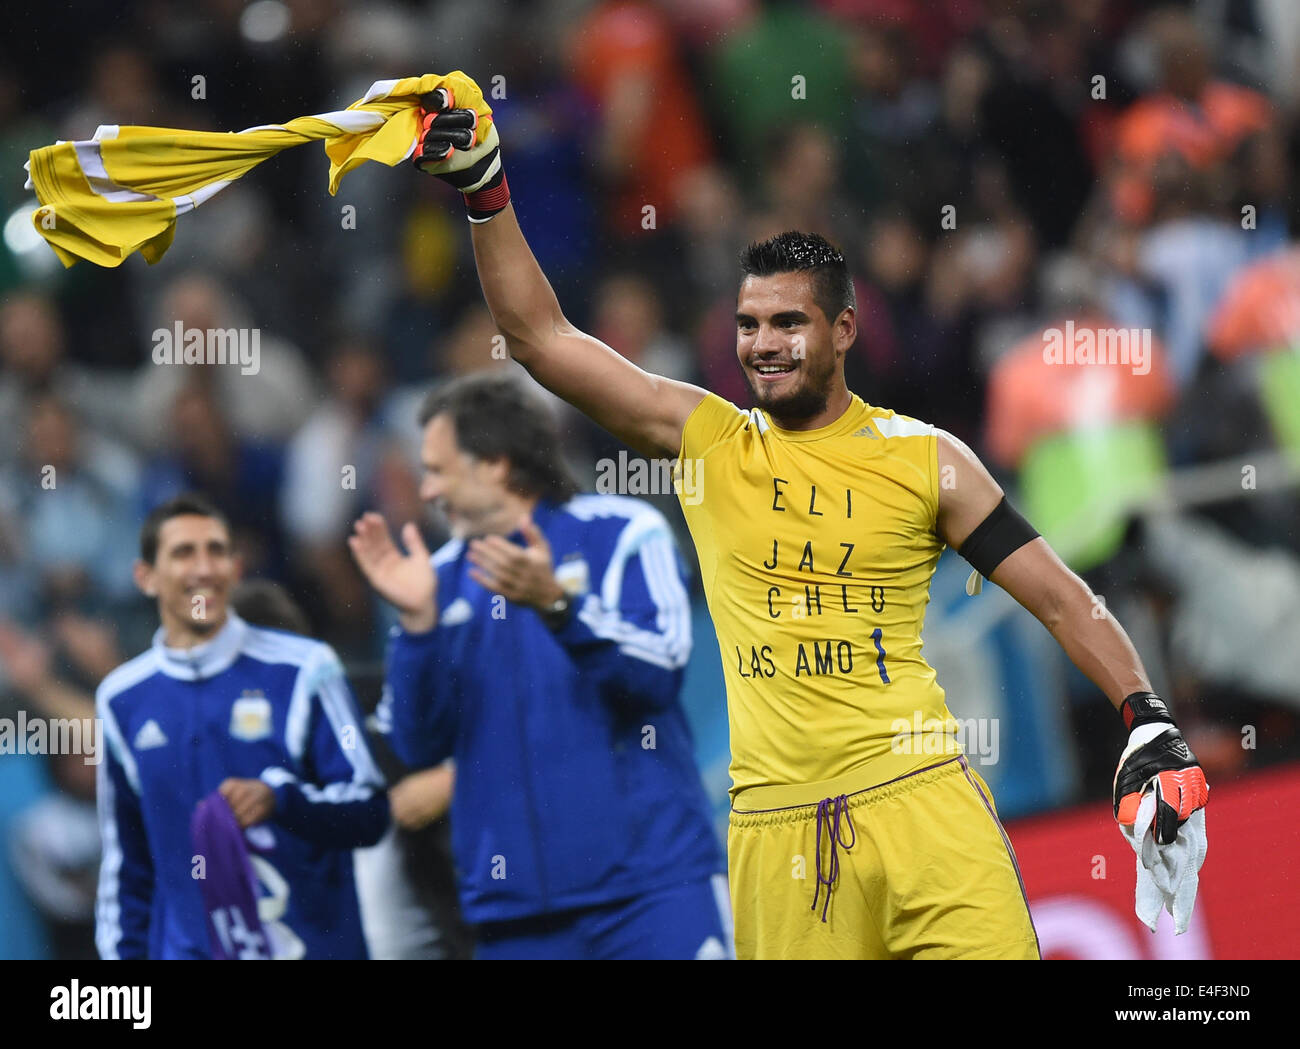 Sao Paulo, Brazil. 09th July, 2014. Argentina's goalkeeper Sergio Romero celebrates after winning the penalty shoot-out of the FIFA World Cup 2014 semi-final soccer match between the Netherlands and Argentina at the Arena Corinthians in Sao Paulo, Brazil, 09 July 2014. Photo: Marius Becker/dpa/Alamy Live News Stock Photo